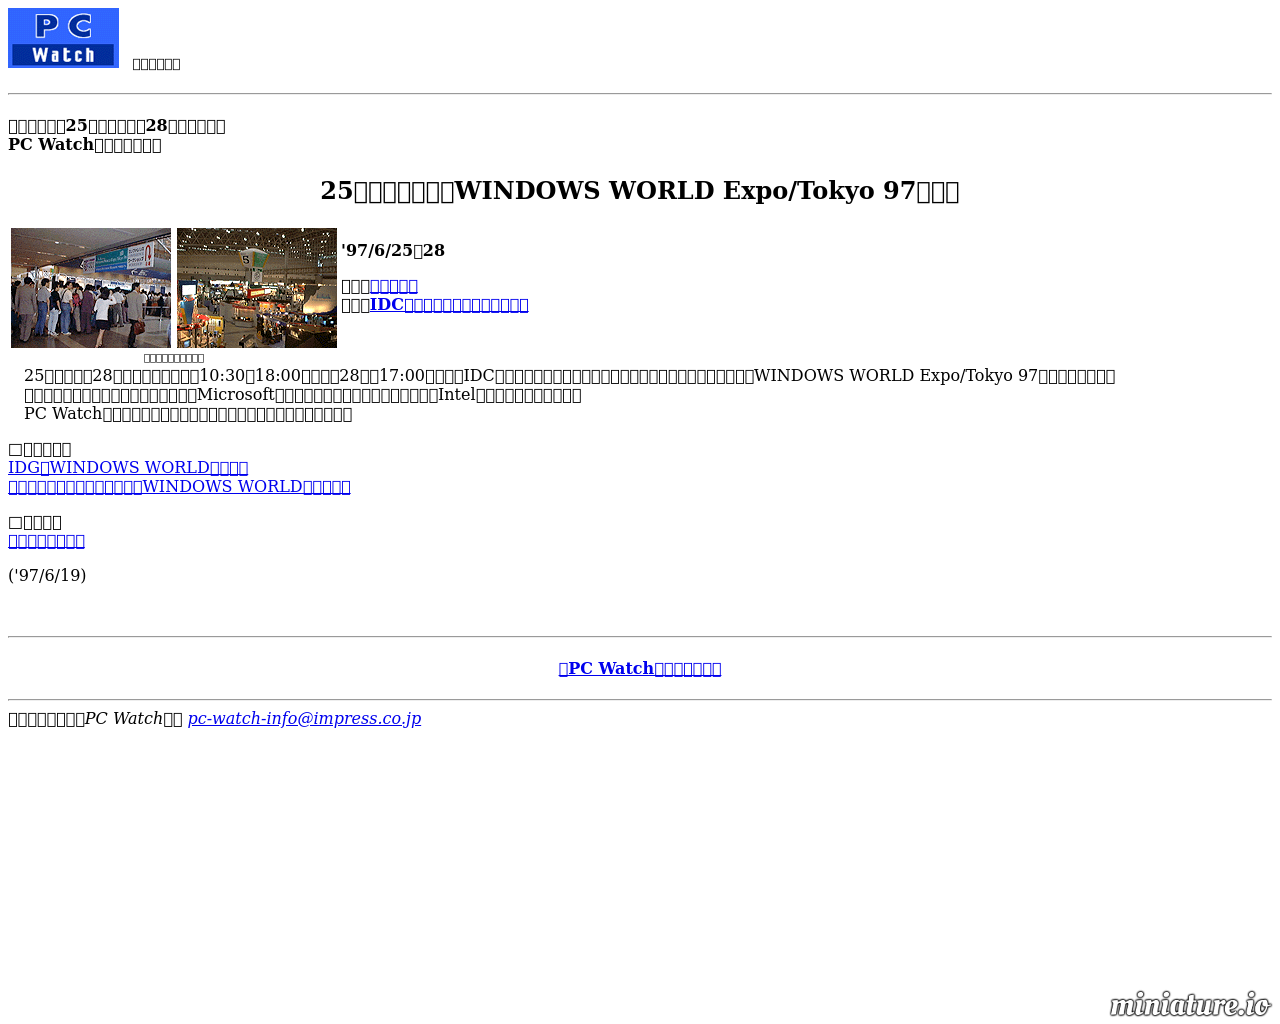 http://pc.watch.impress.co.jp/docs/article/970619/wwexpo.htmのプレビュー画像